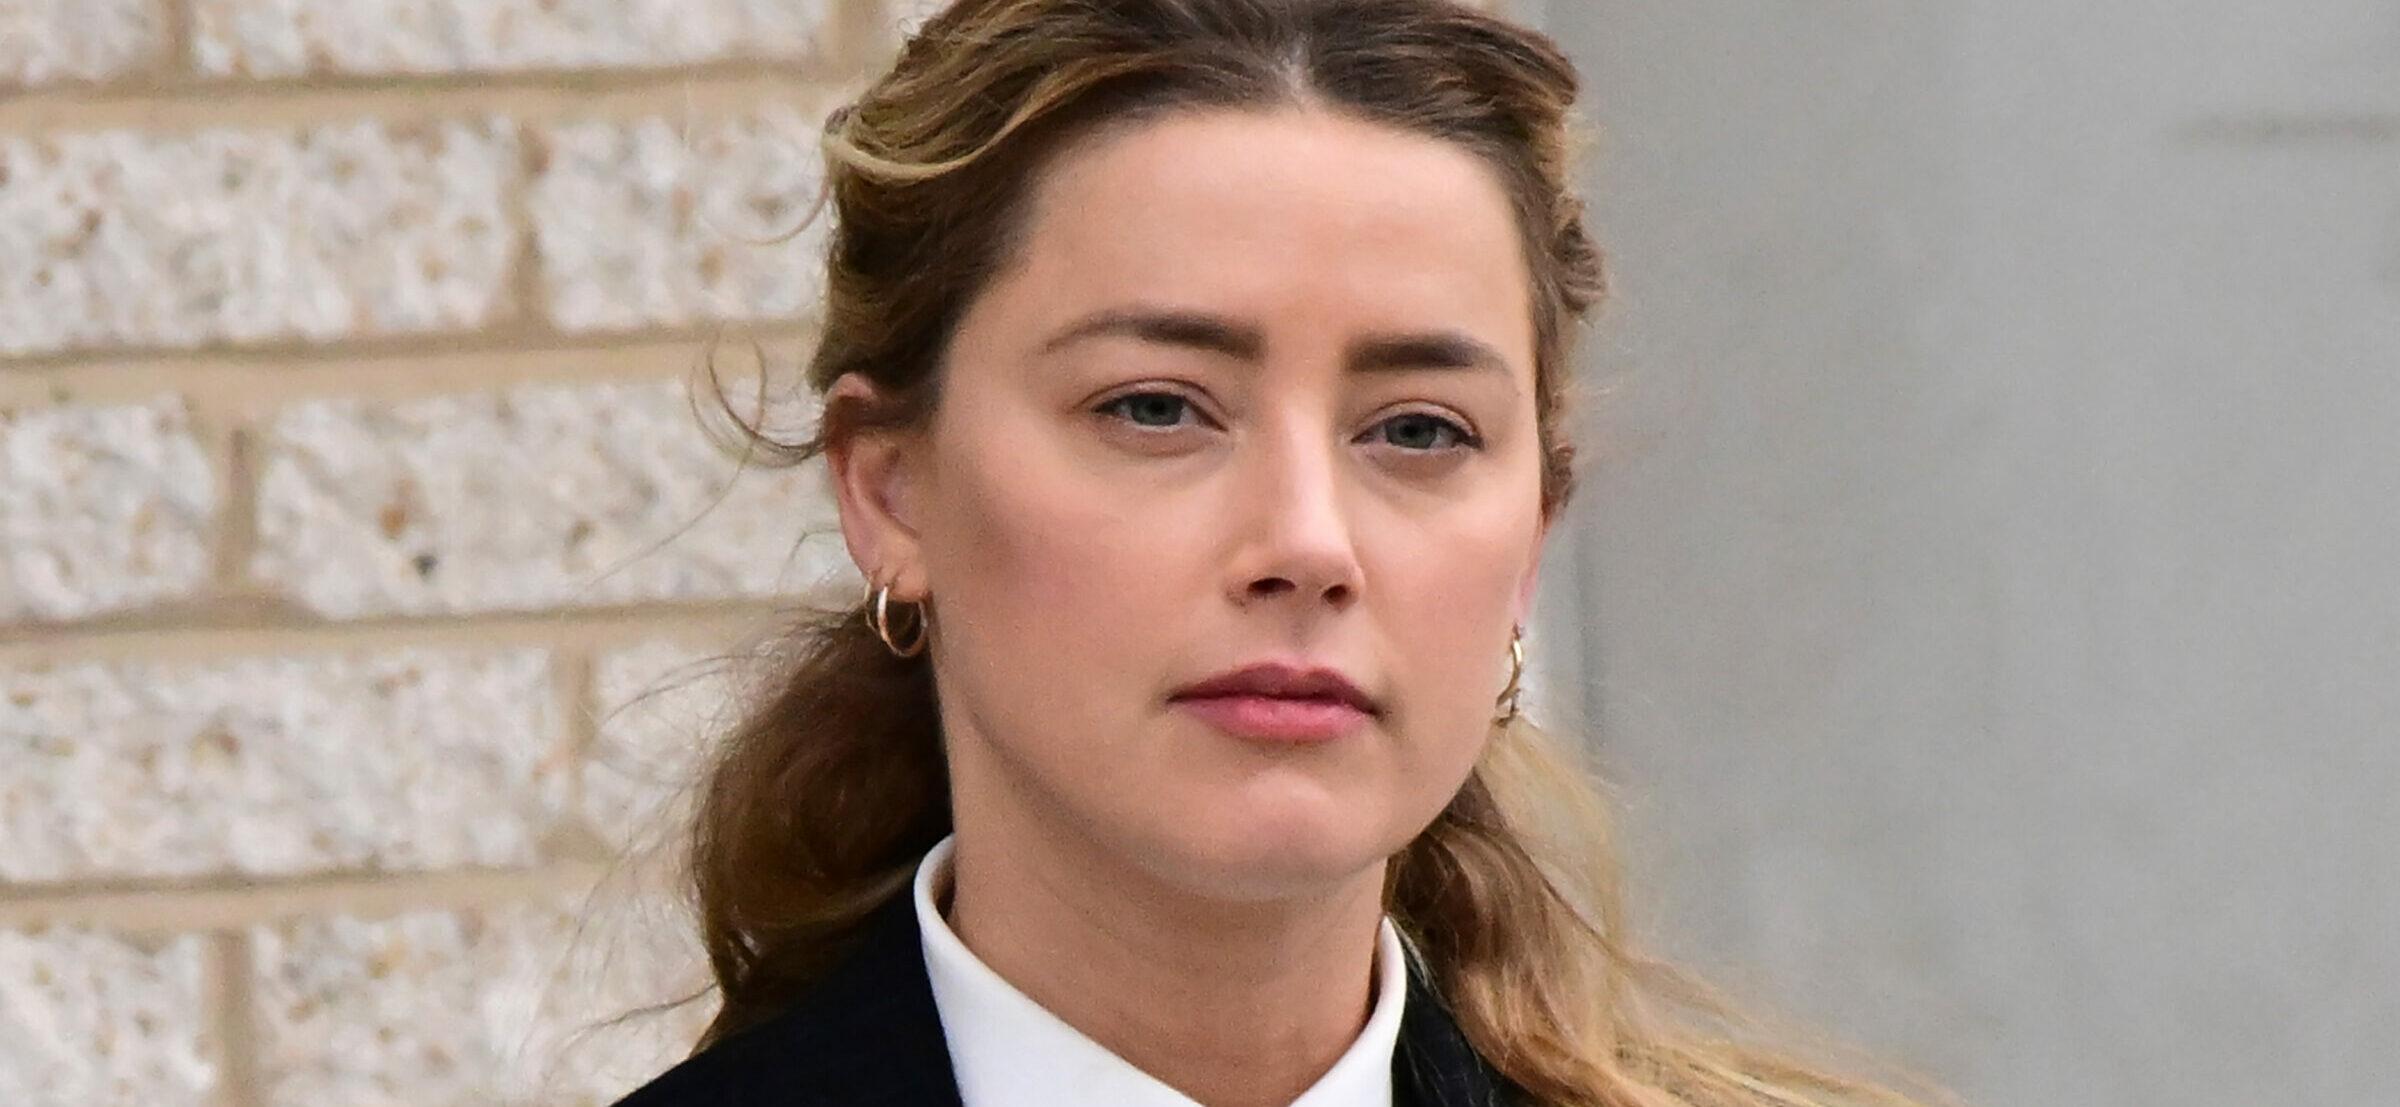 Makeup brand claims Amber Heard evidence false in Johnny Depp trial